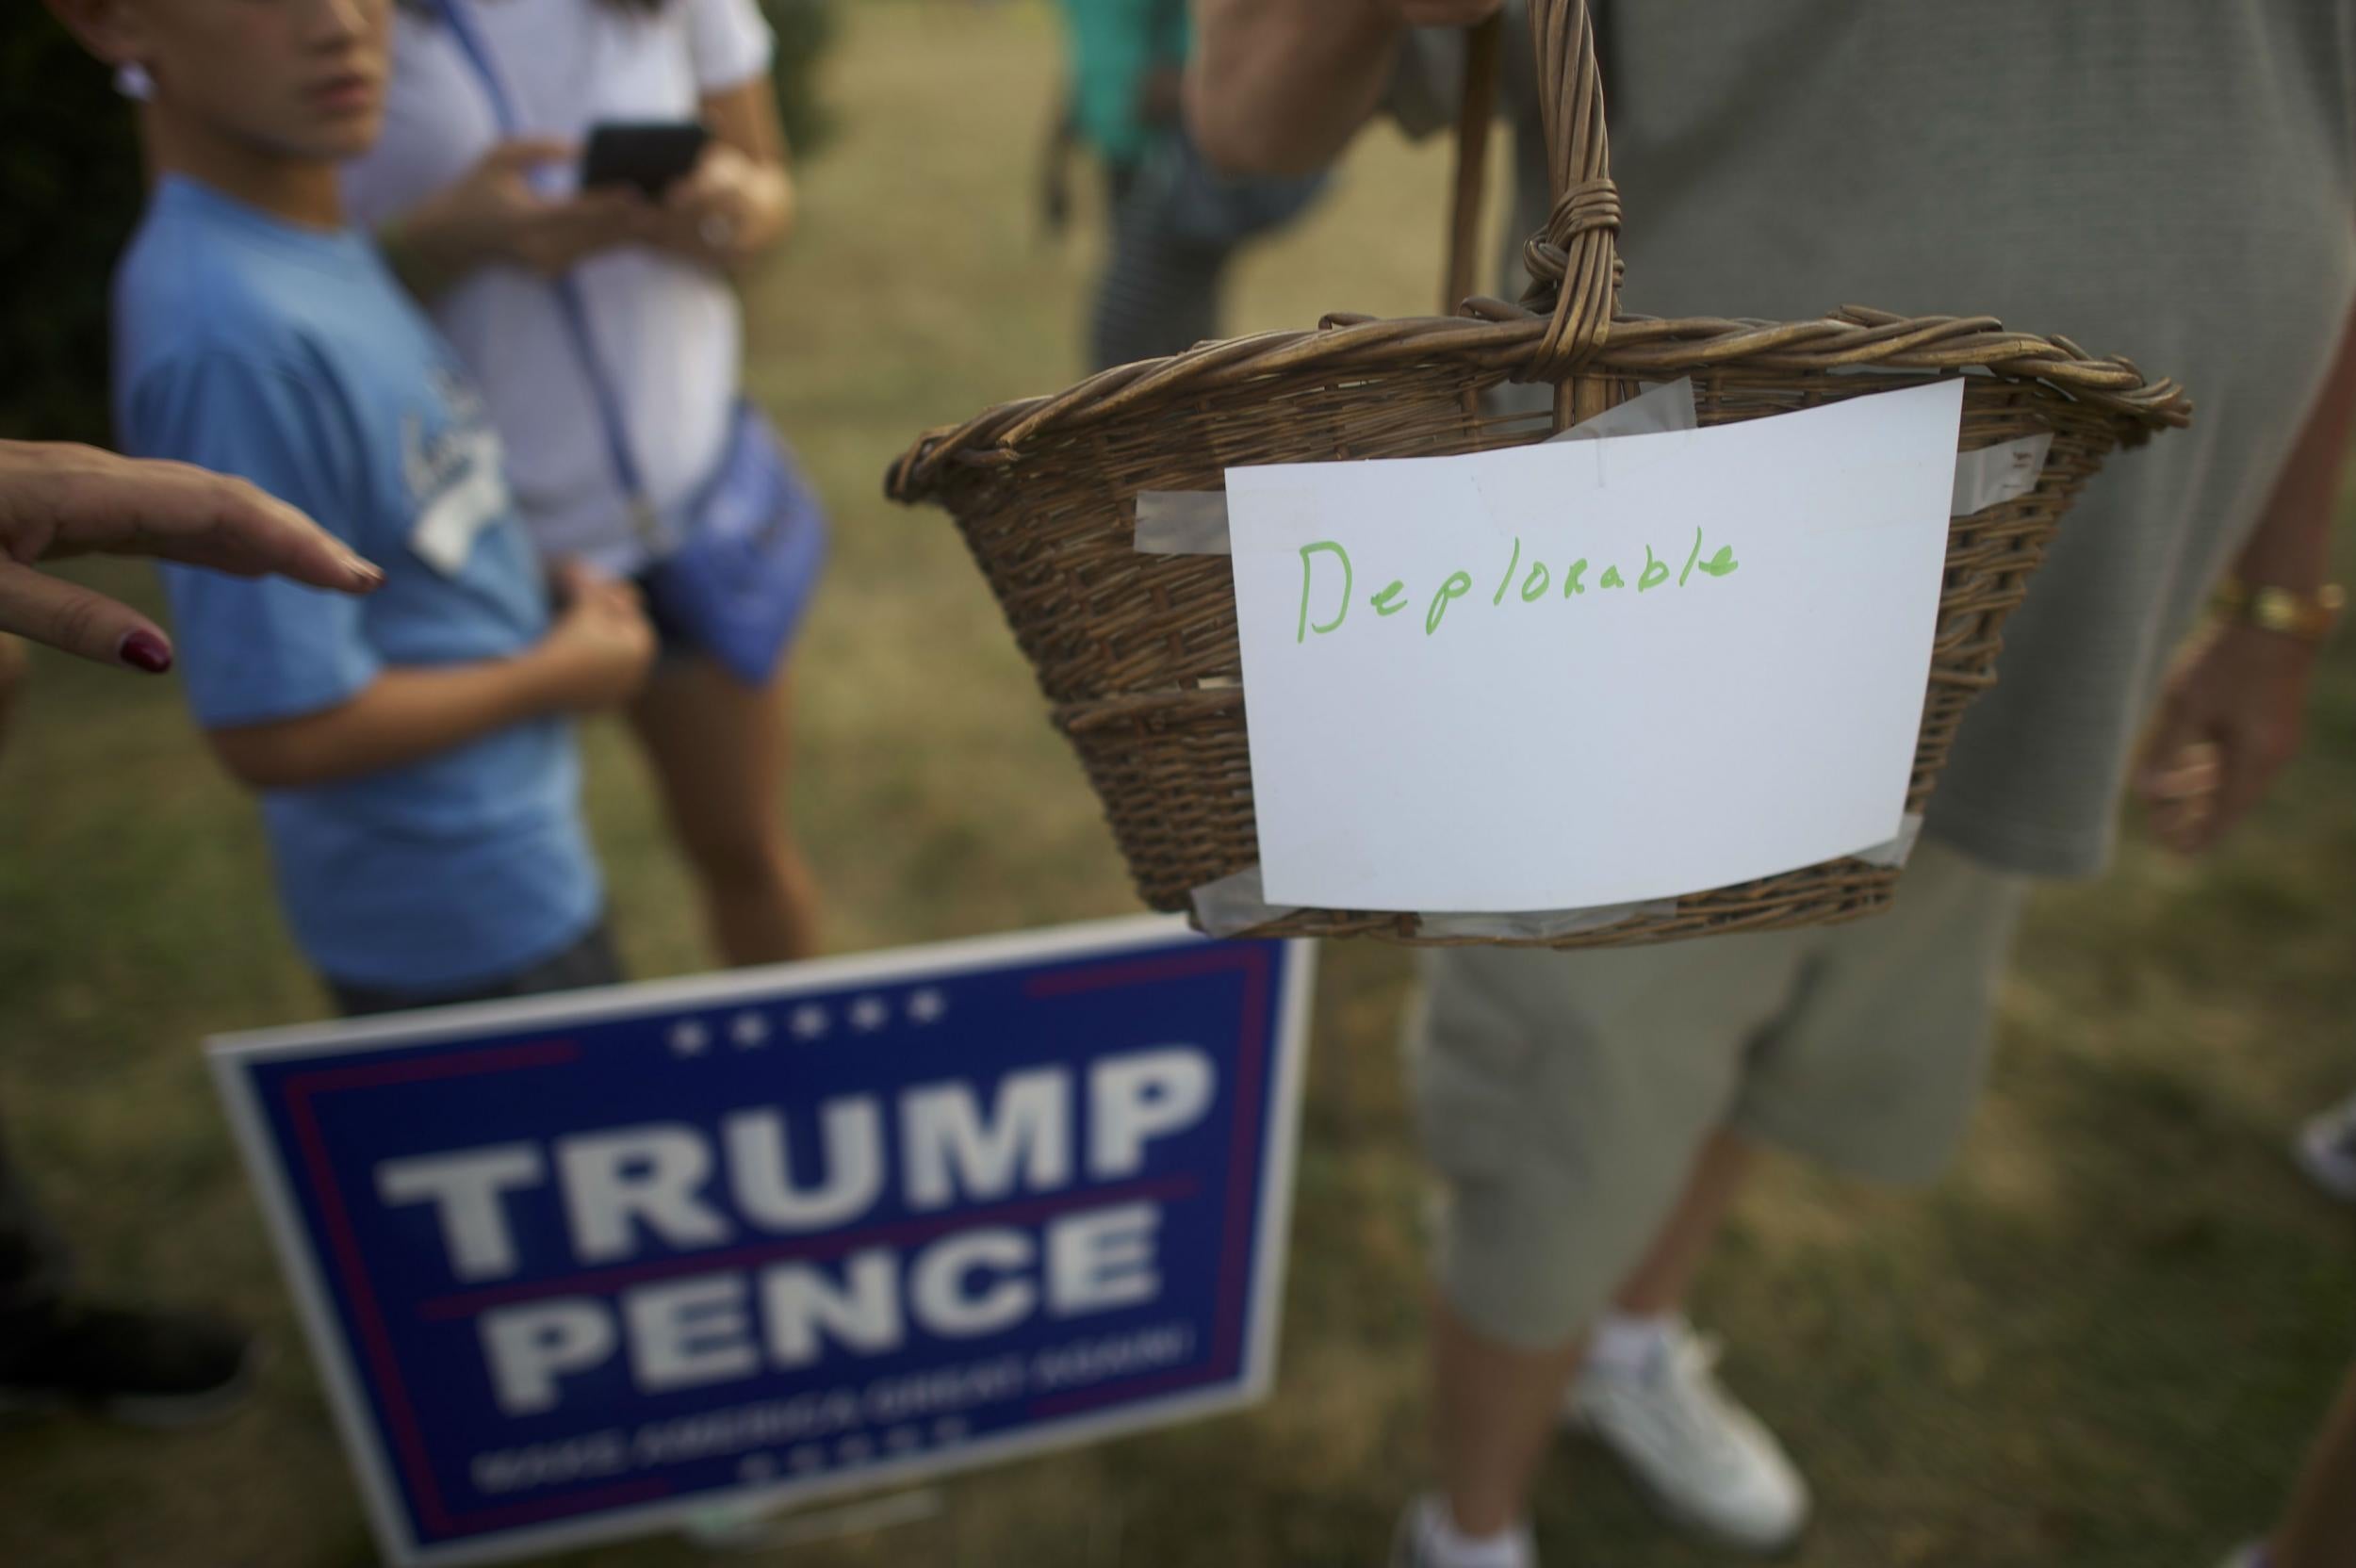 Trump supporter showing disdain for Clinton's 'deplorables' insult